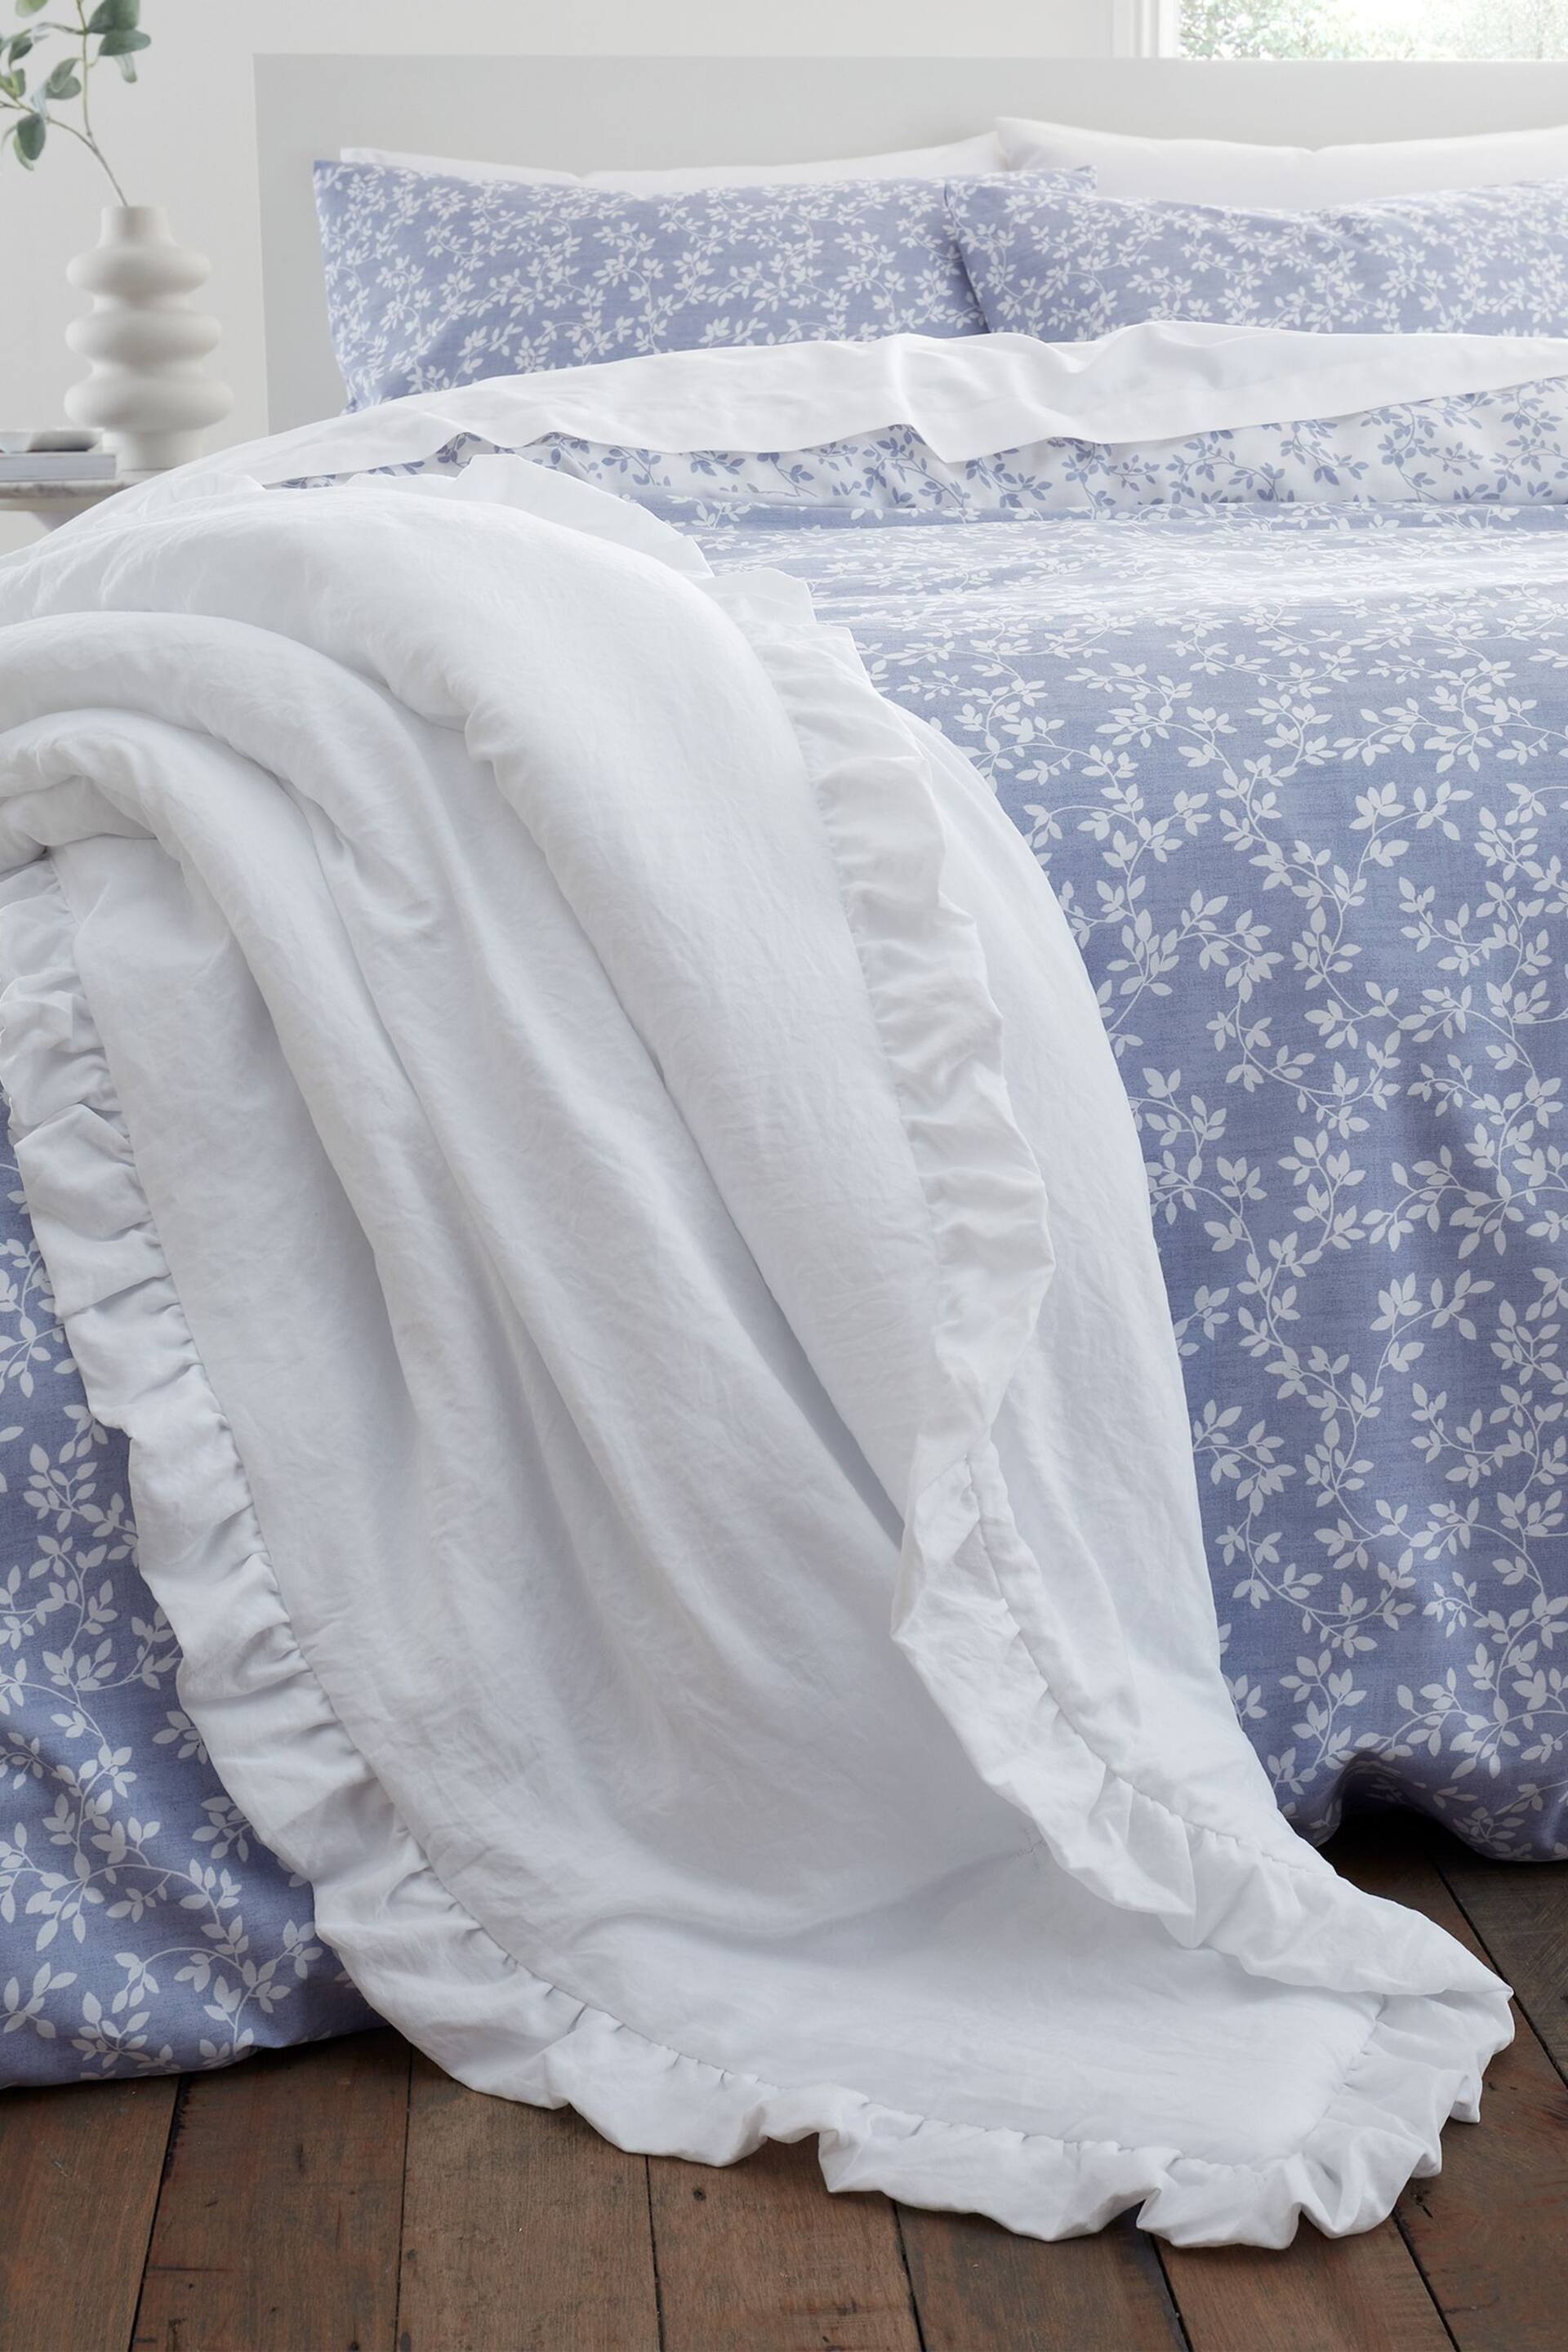 Bianca White Soft Washed Frill 220x230cm Bedspread - Image 1 of 3